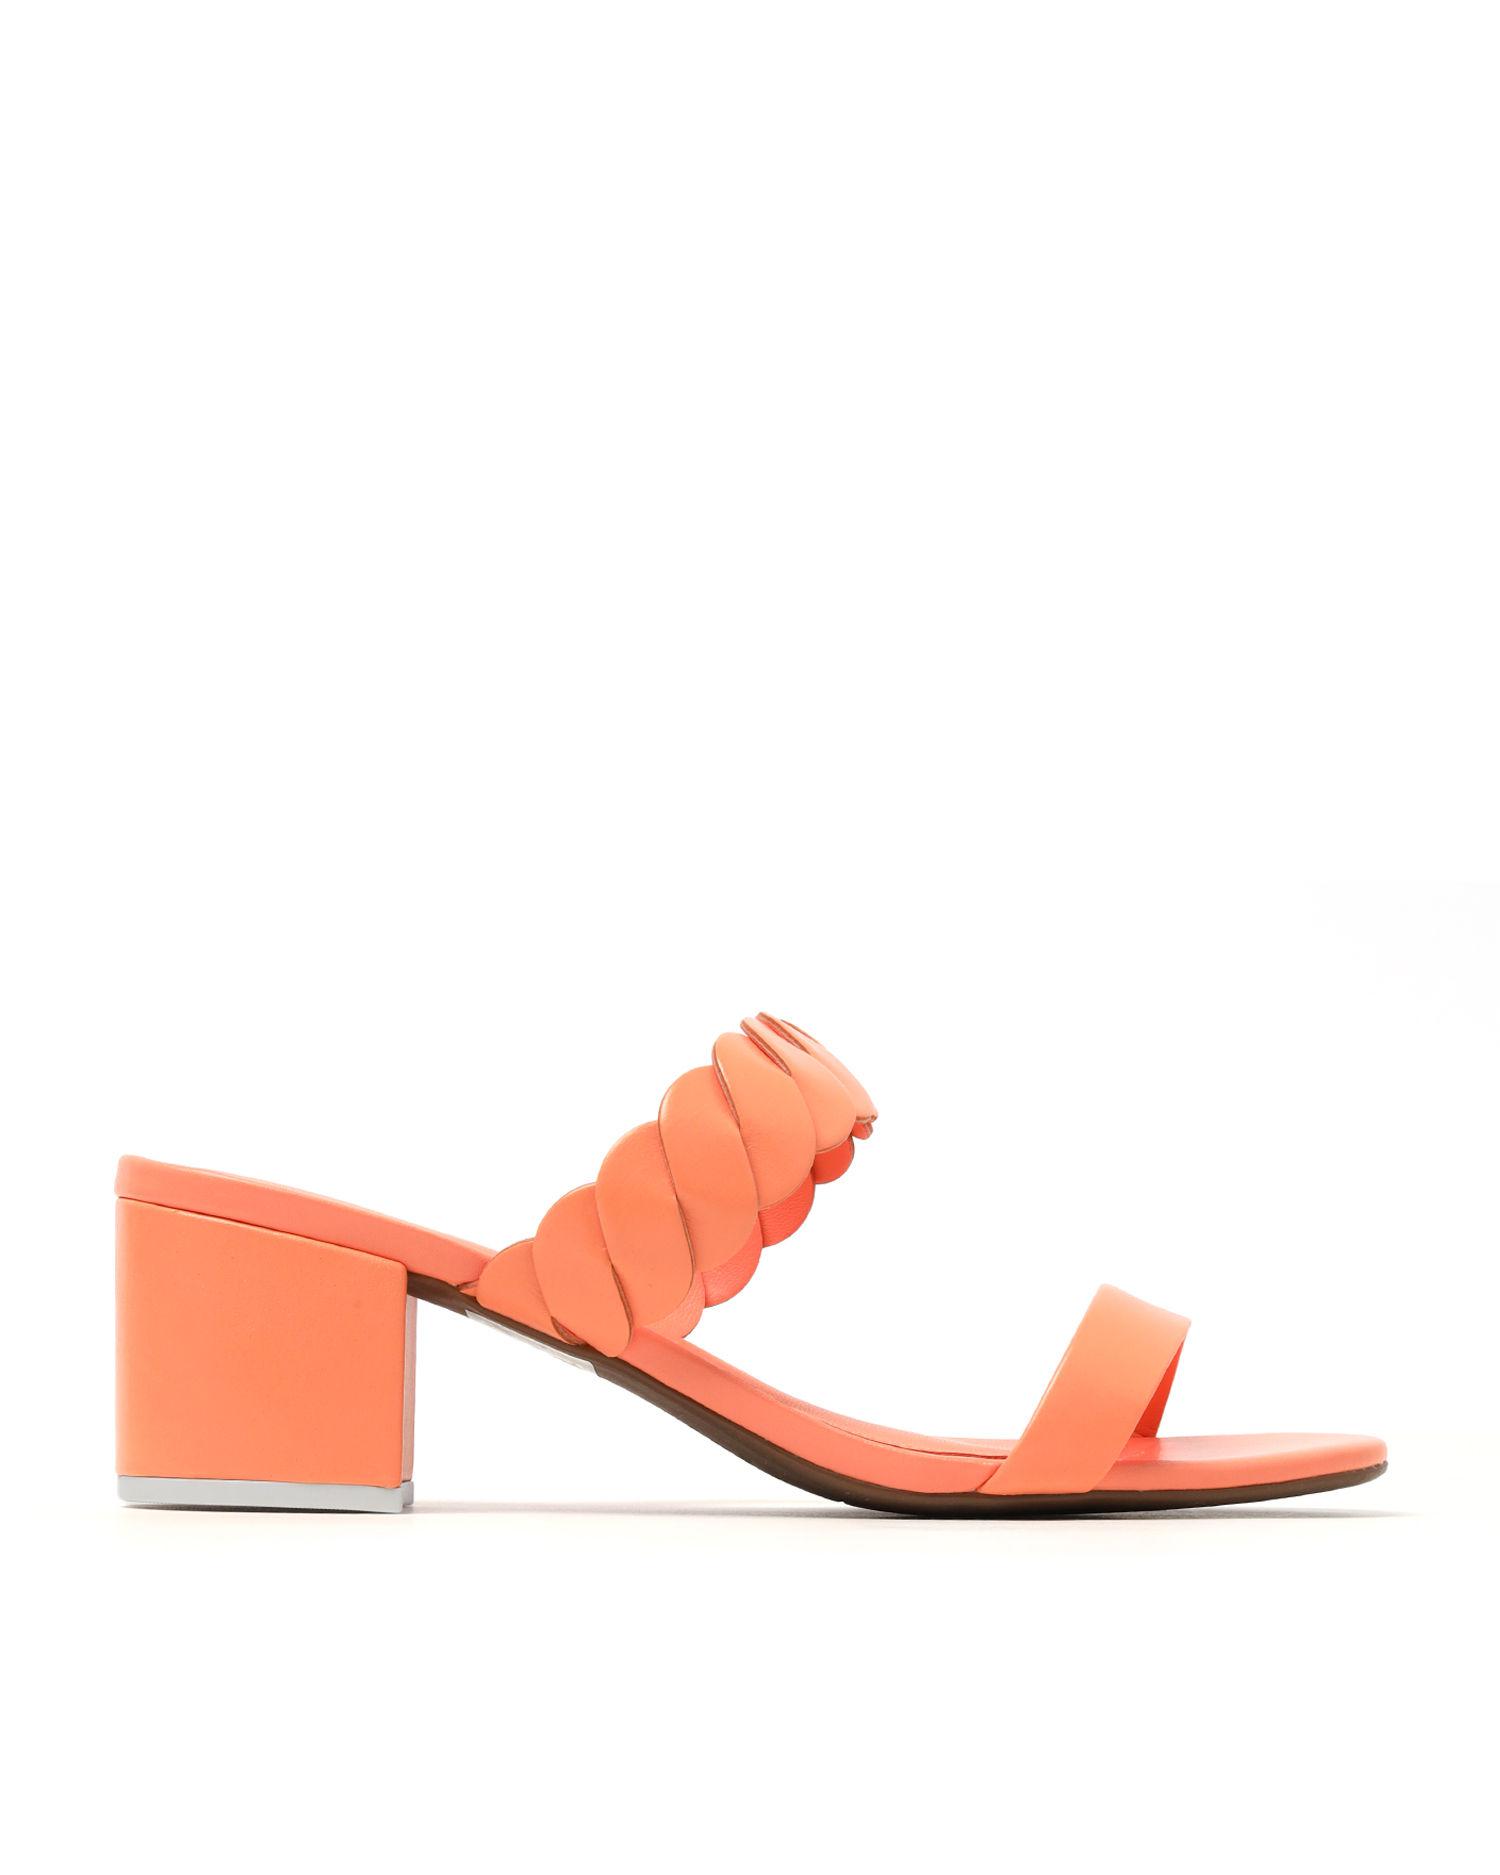 Heeled sandals by AREZZO